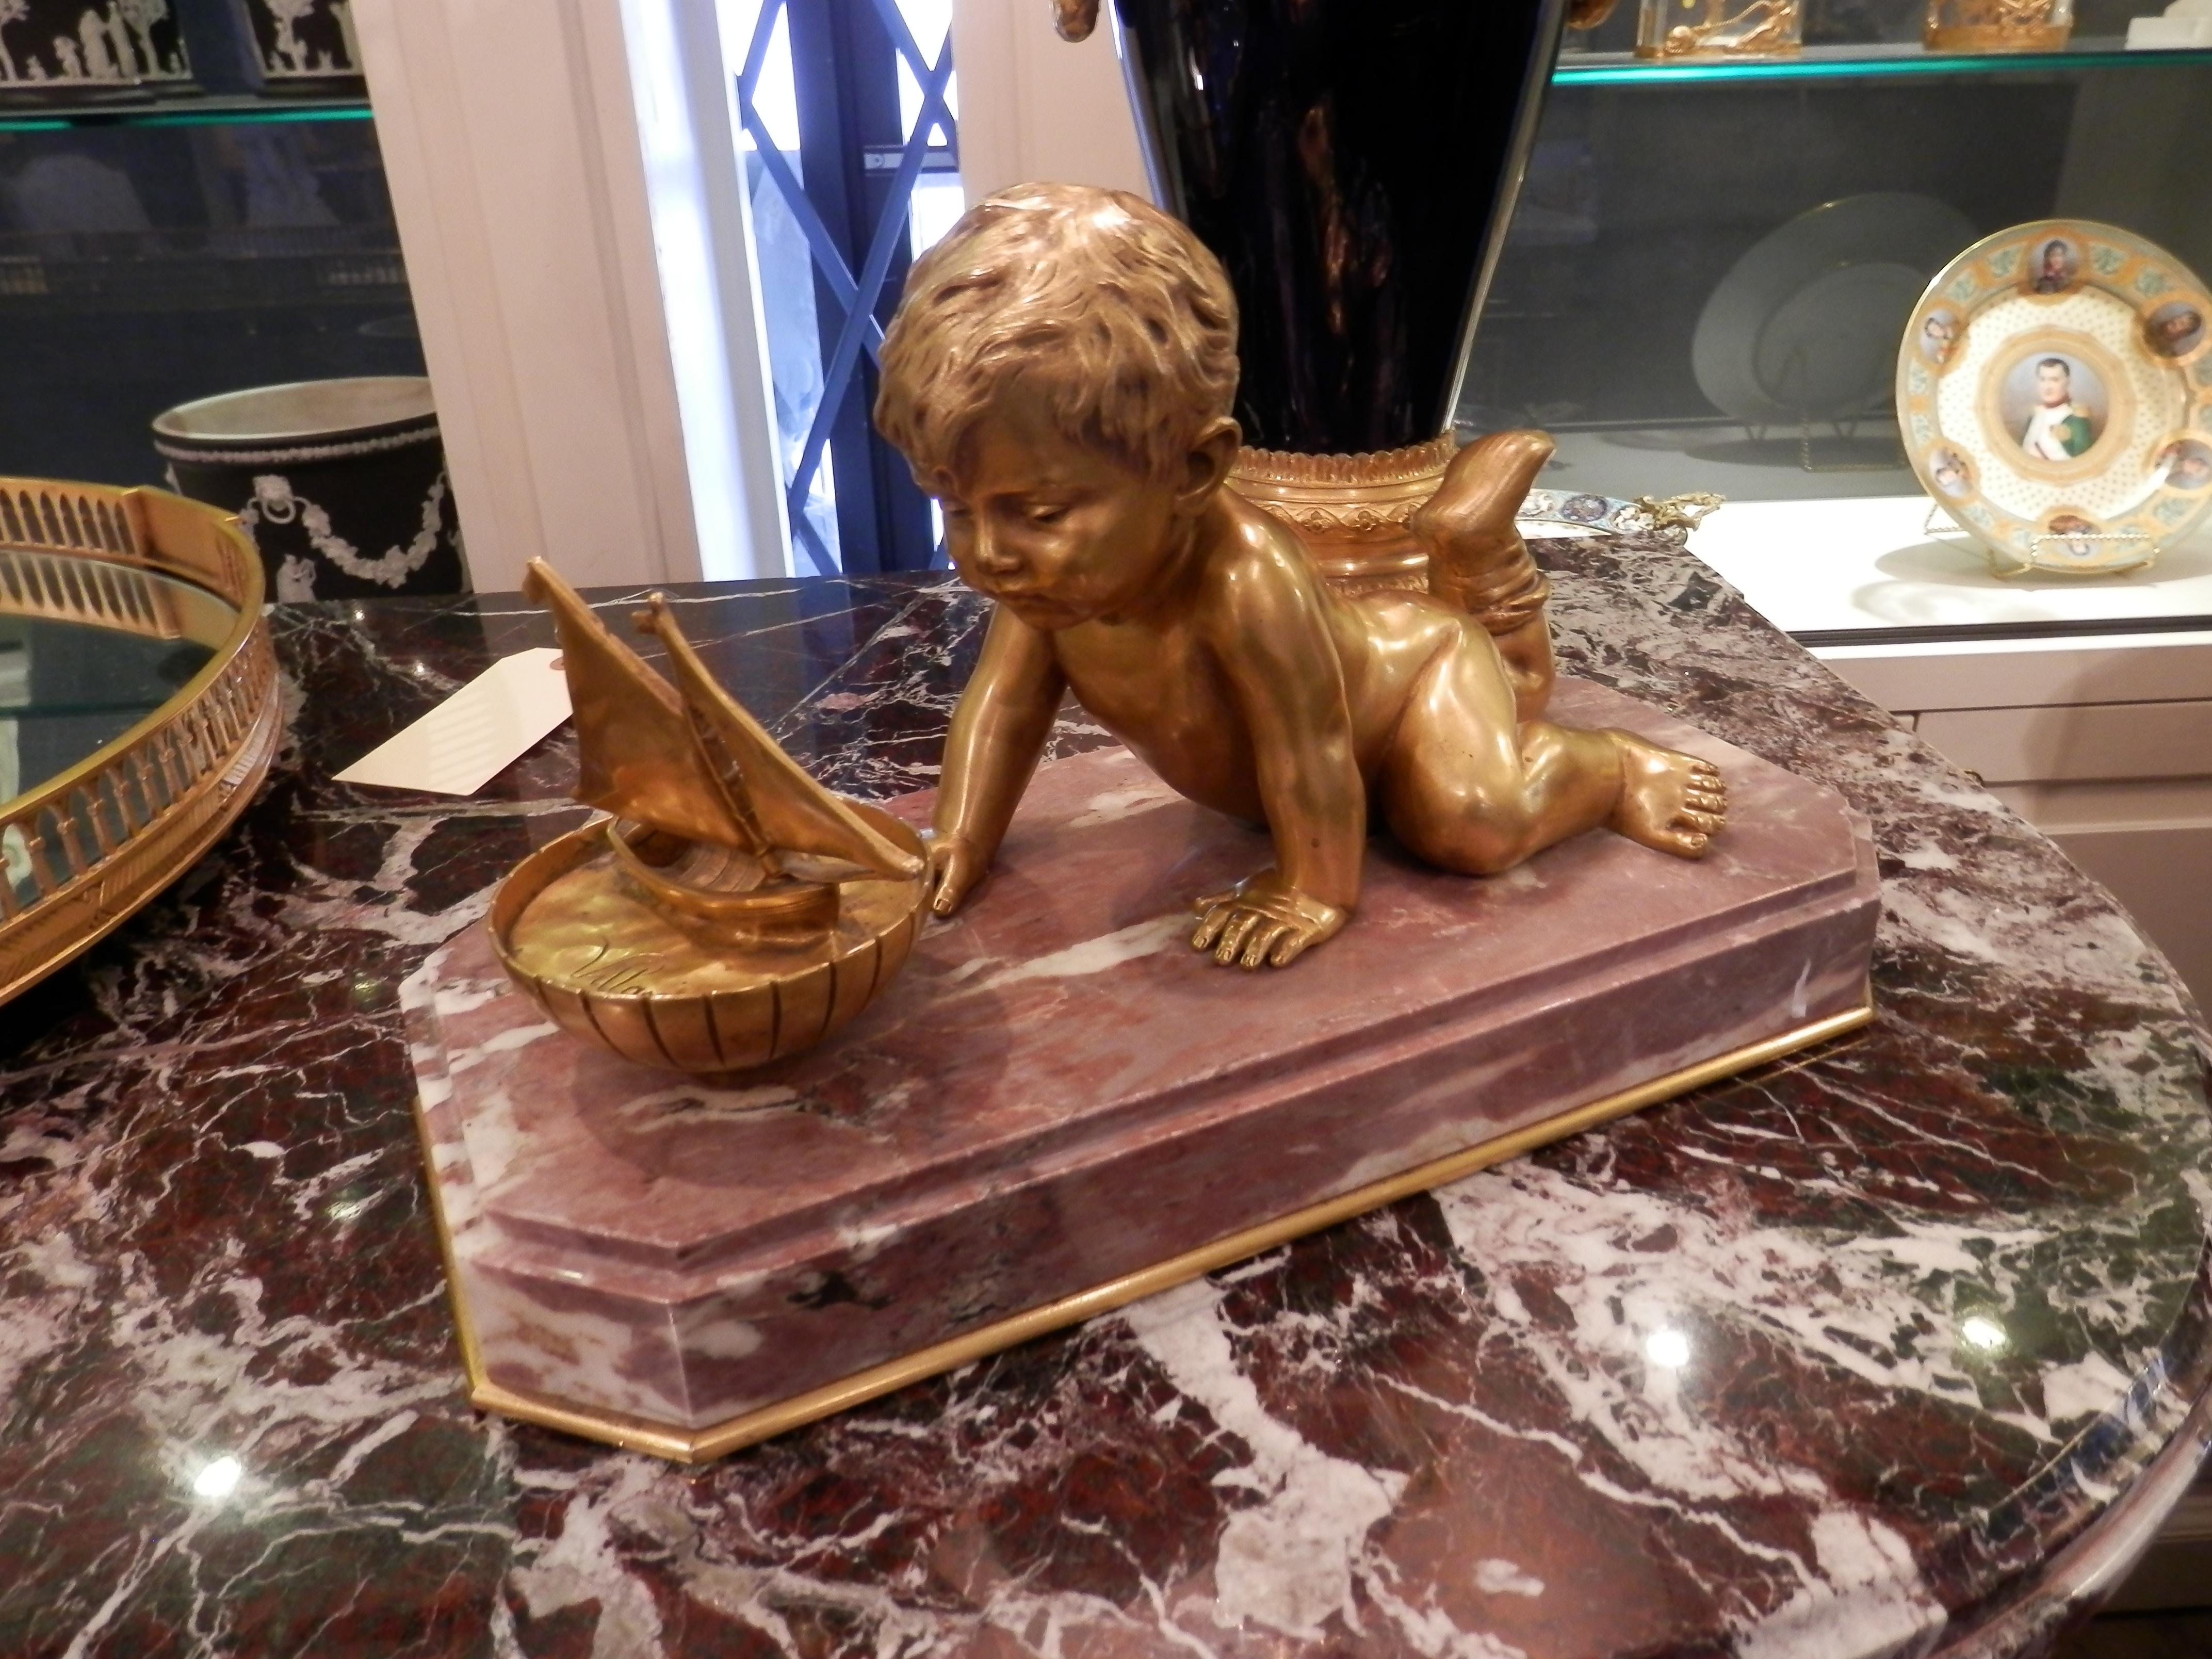 19th century large and fine gilt bronze centerpiece. Signed by the artist. Depicting a gilt bronze cherub playing with his toy boat. Finely cast and chased on a marble base.